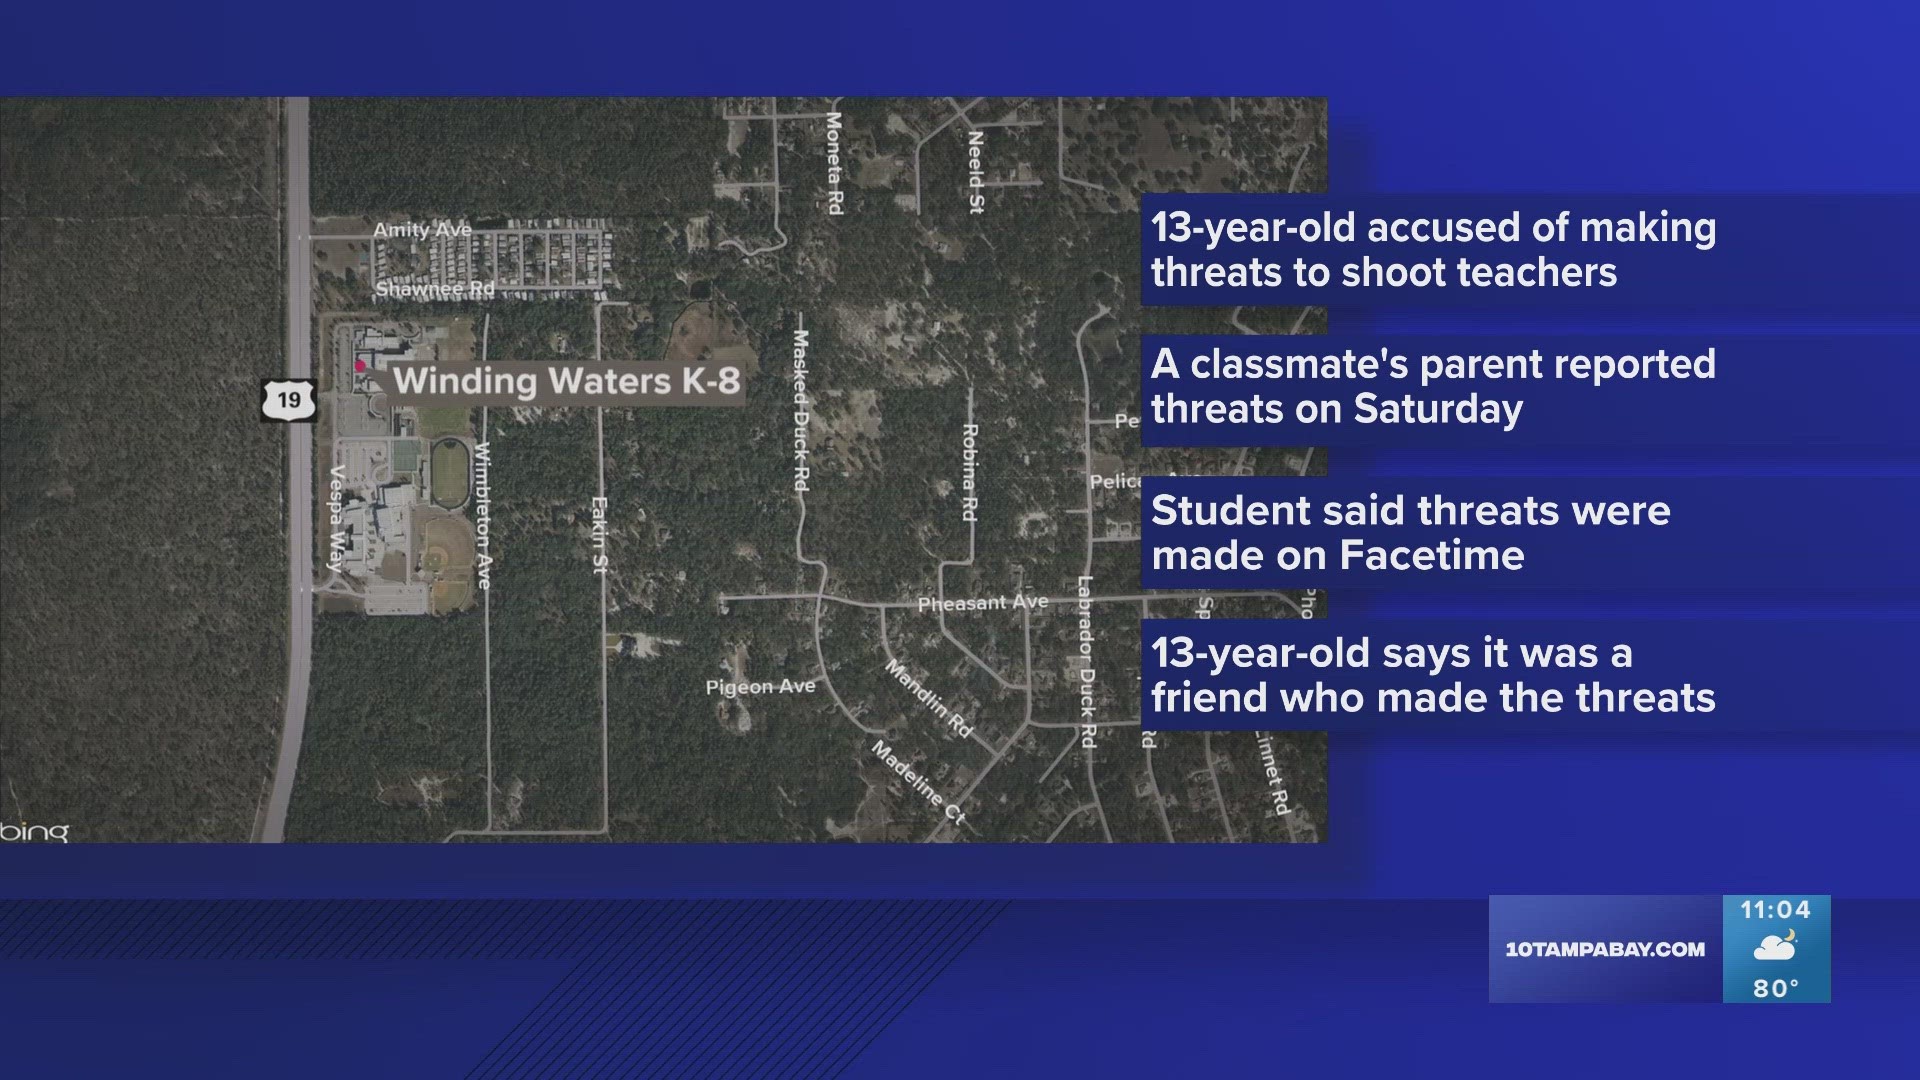 The student was charged with a mass shooting threat.